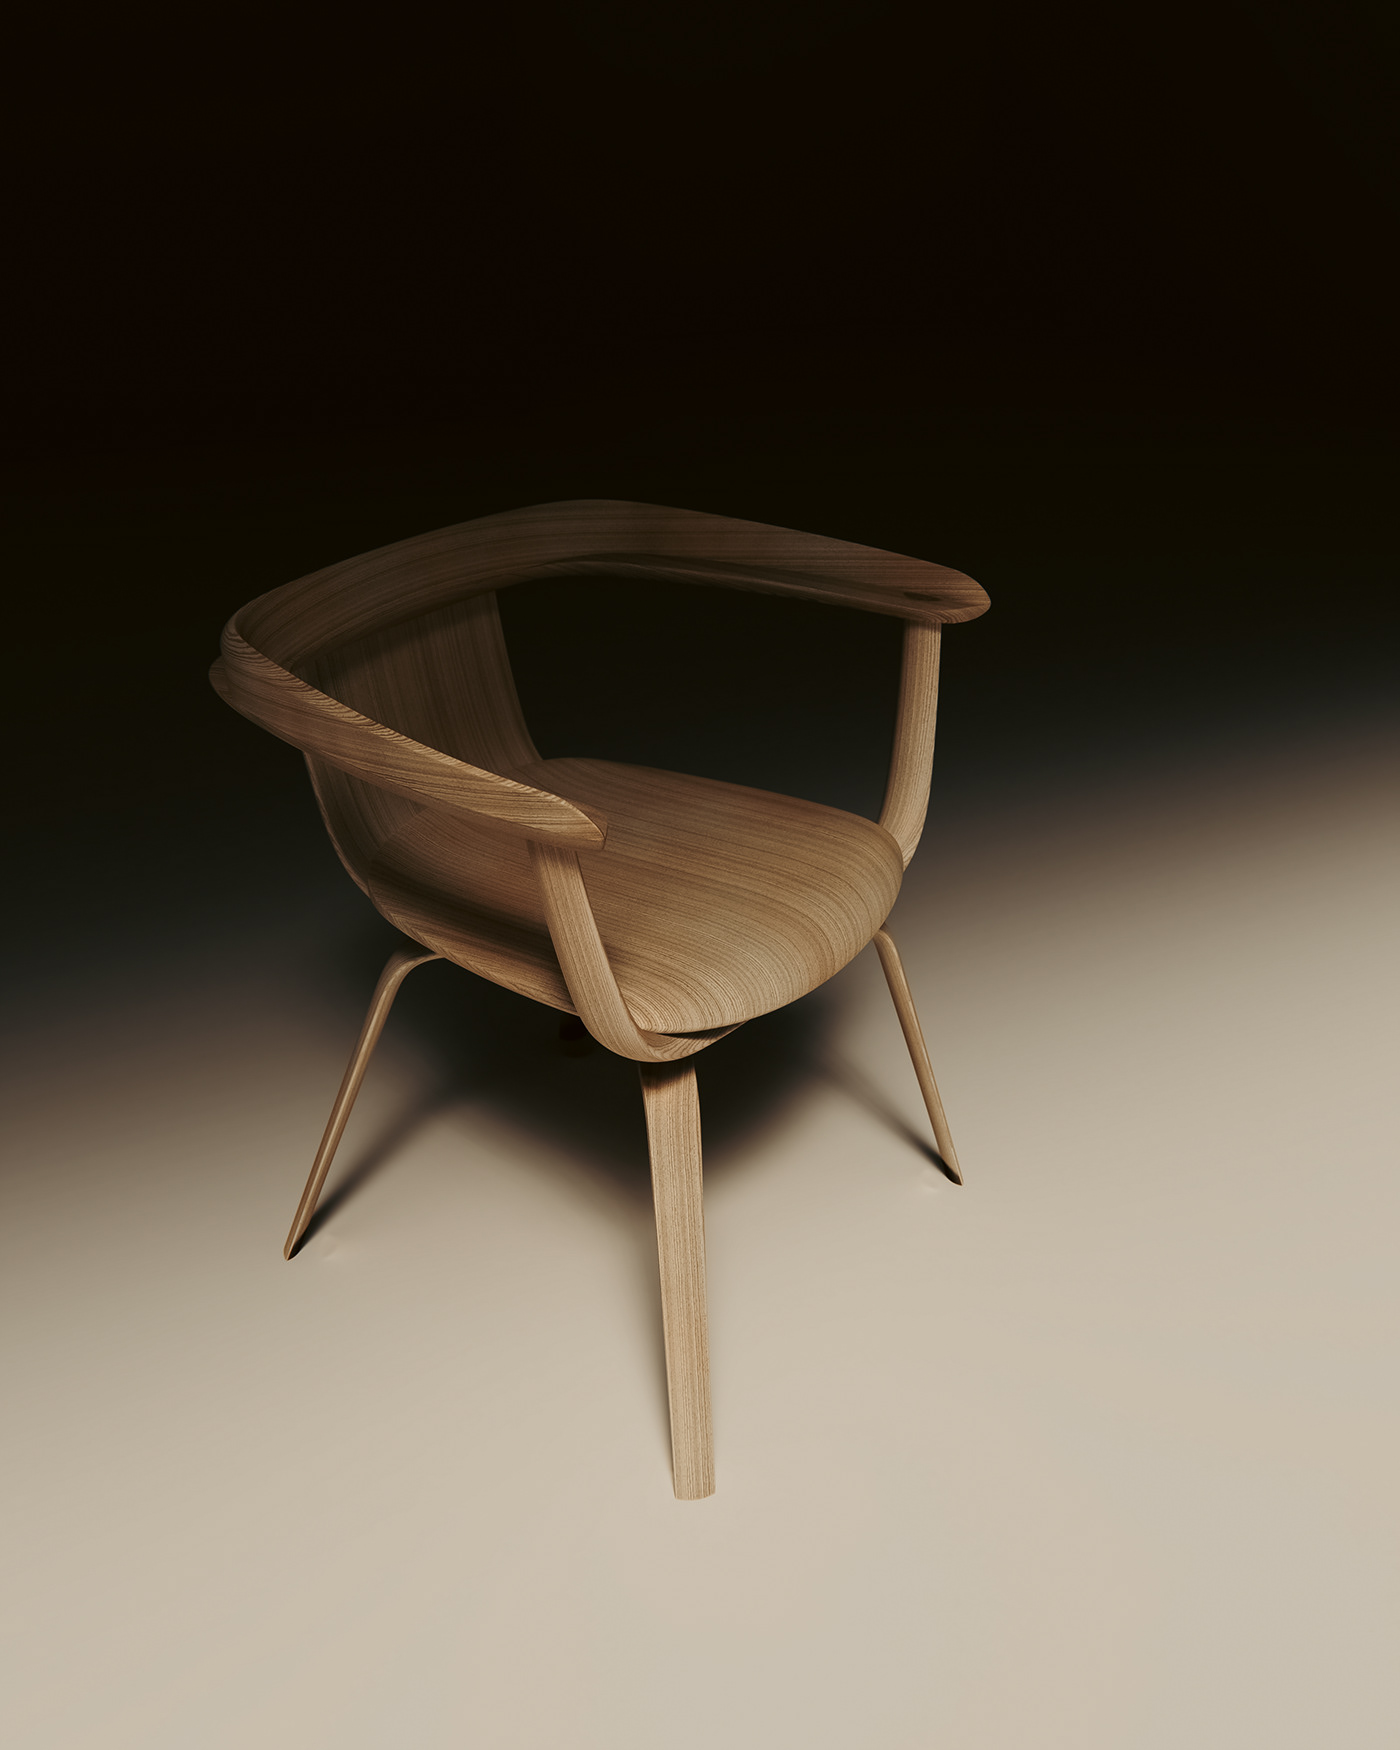 Carpentry chair design details furniture rendering seat traditional wood wooden